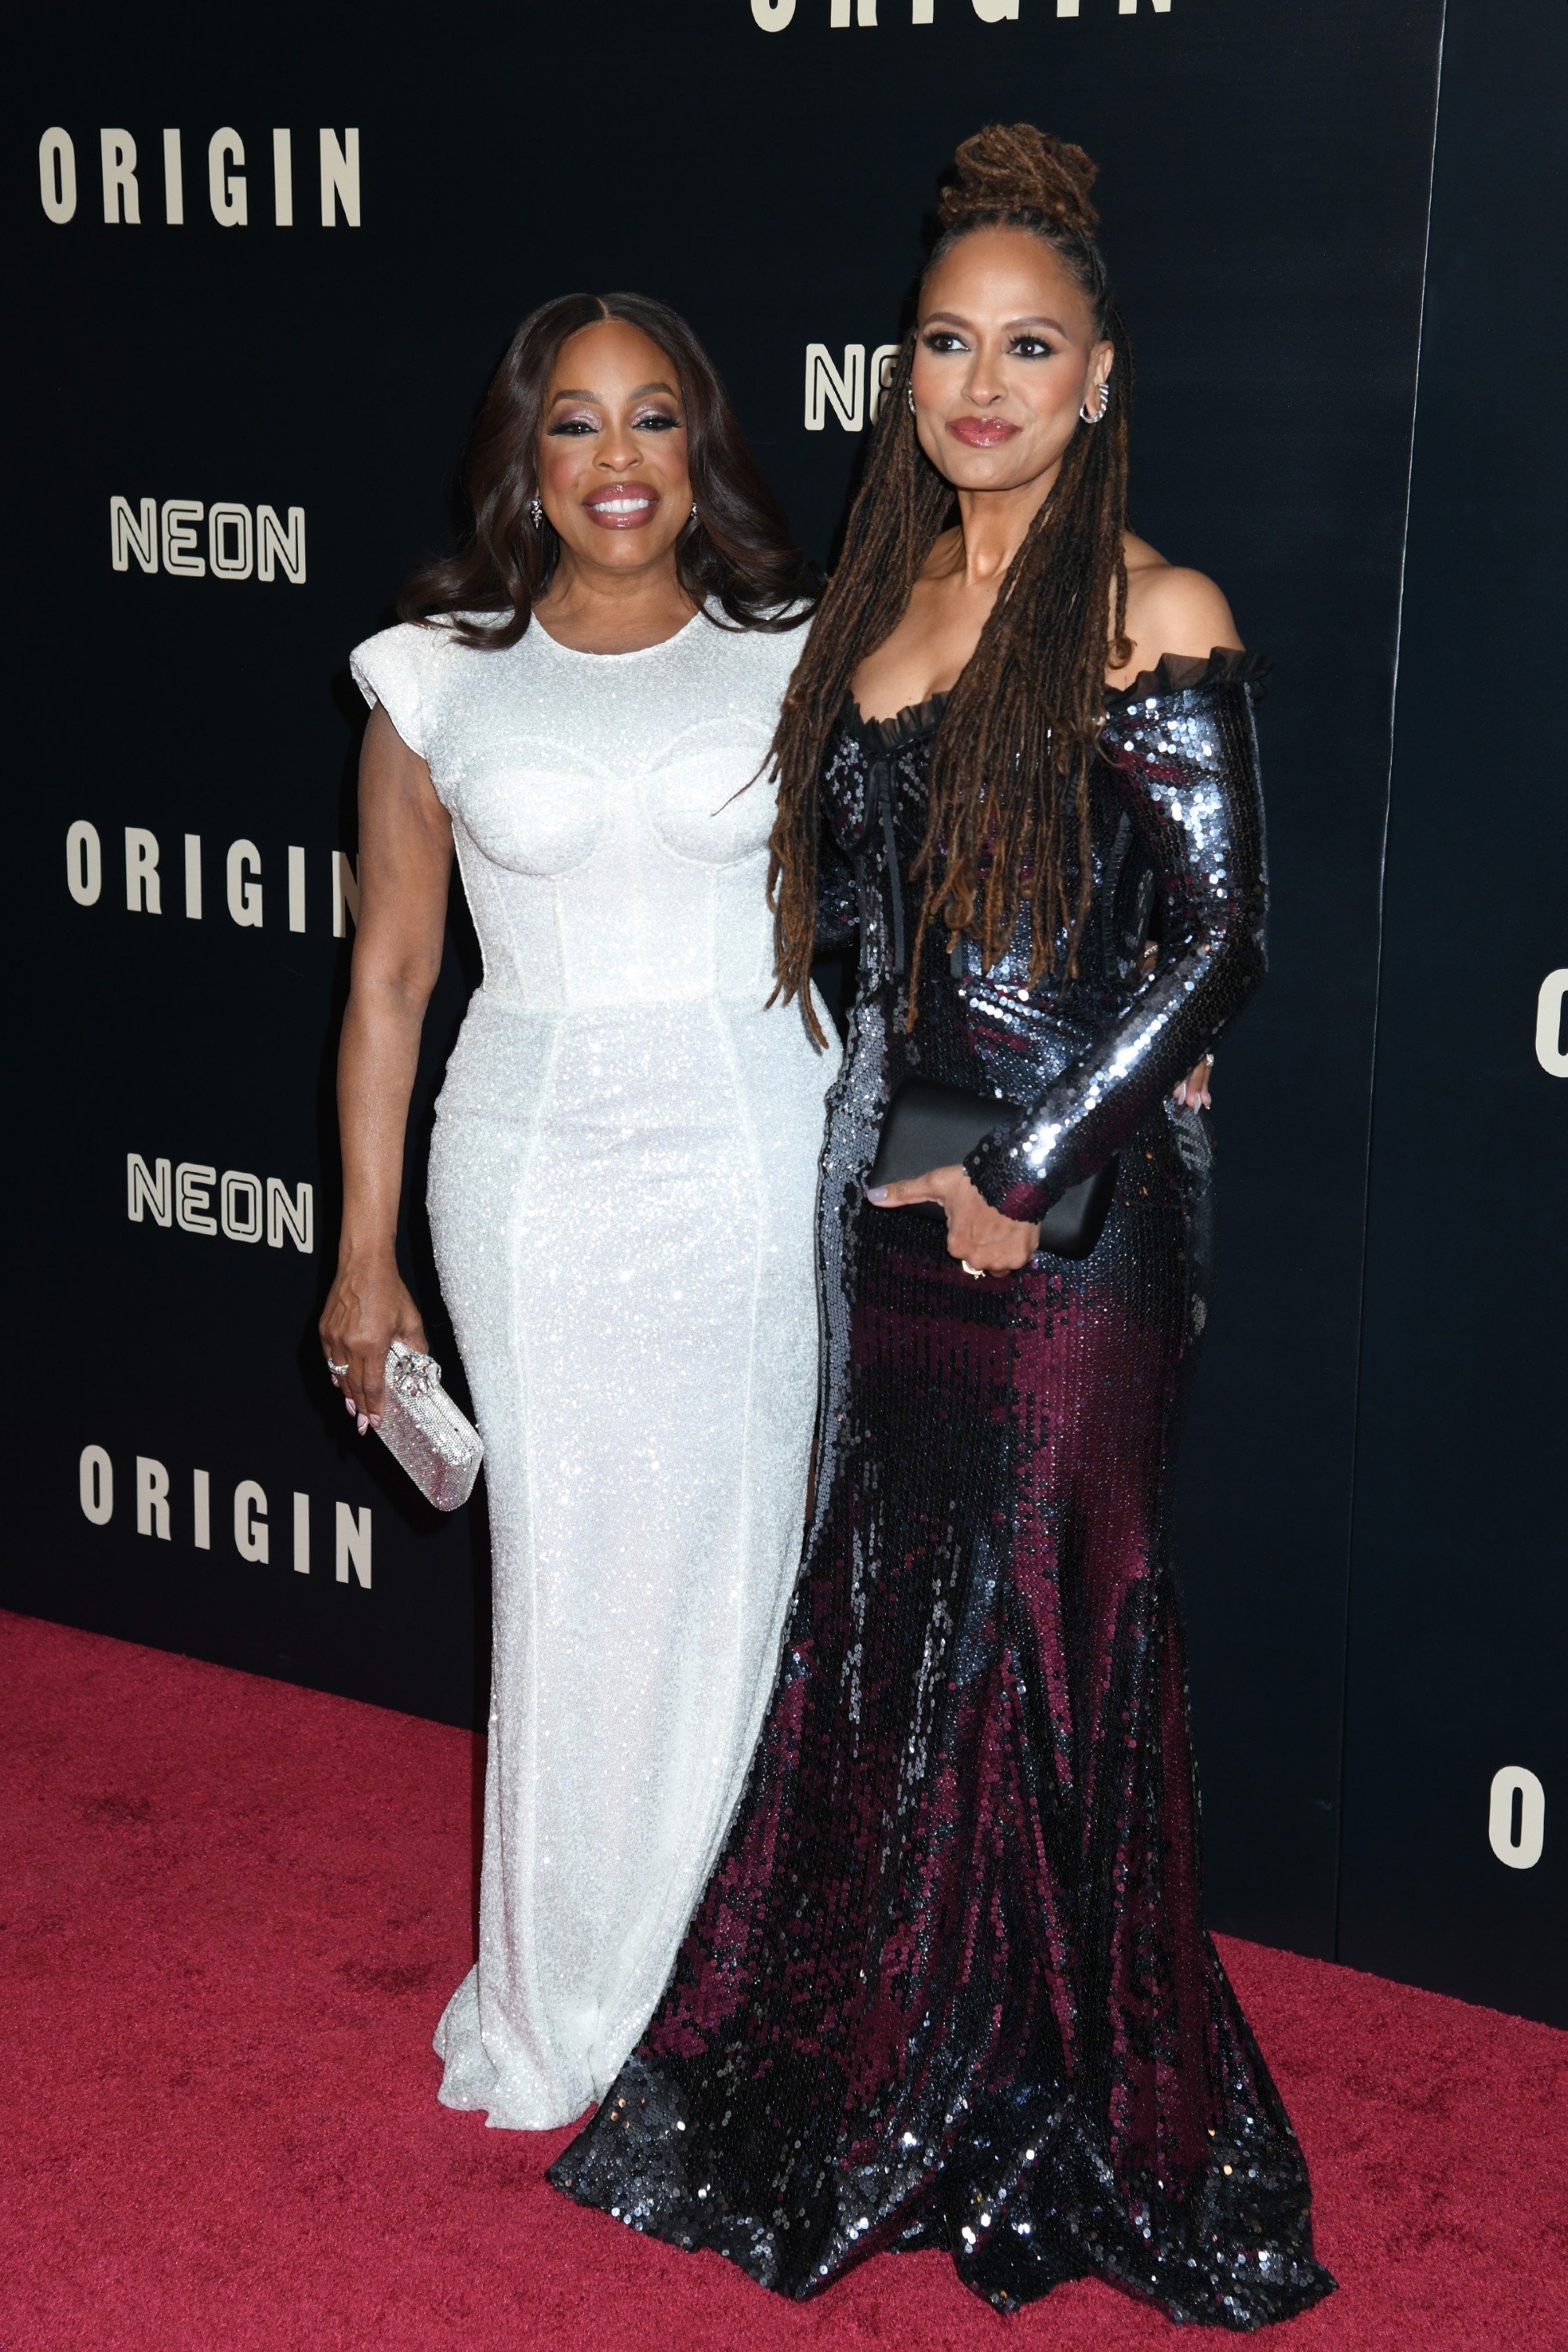 Niecy Nash and Ava DuVernay pose for a picture together